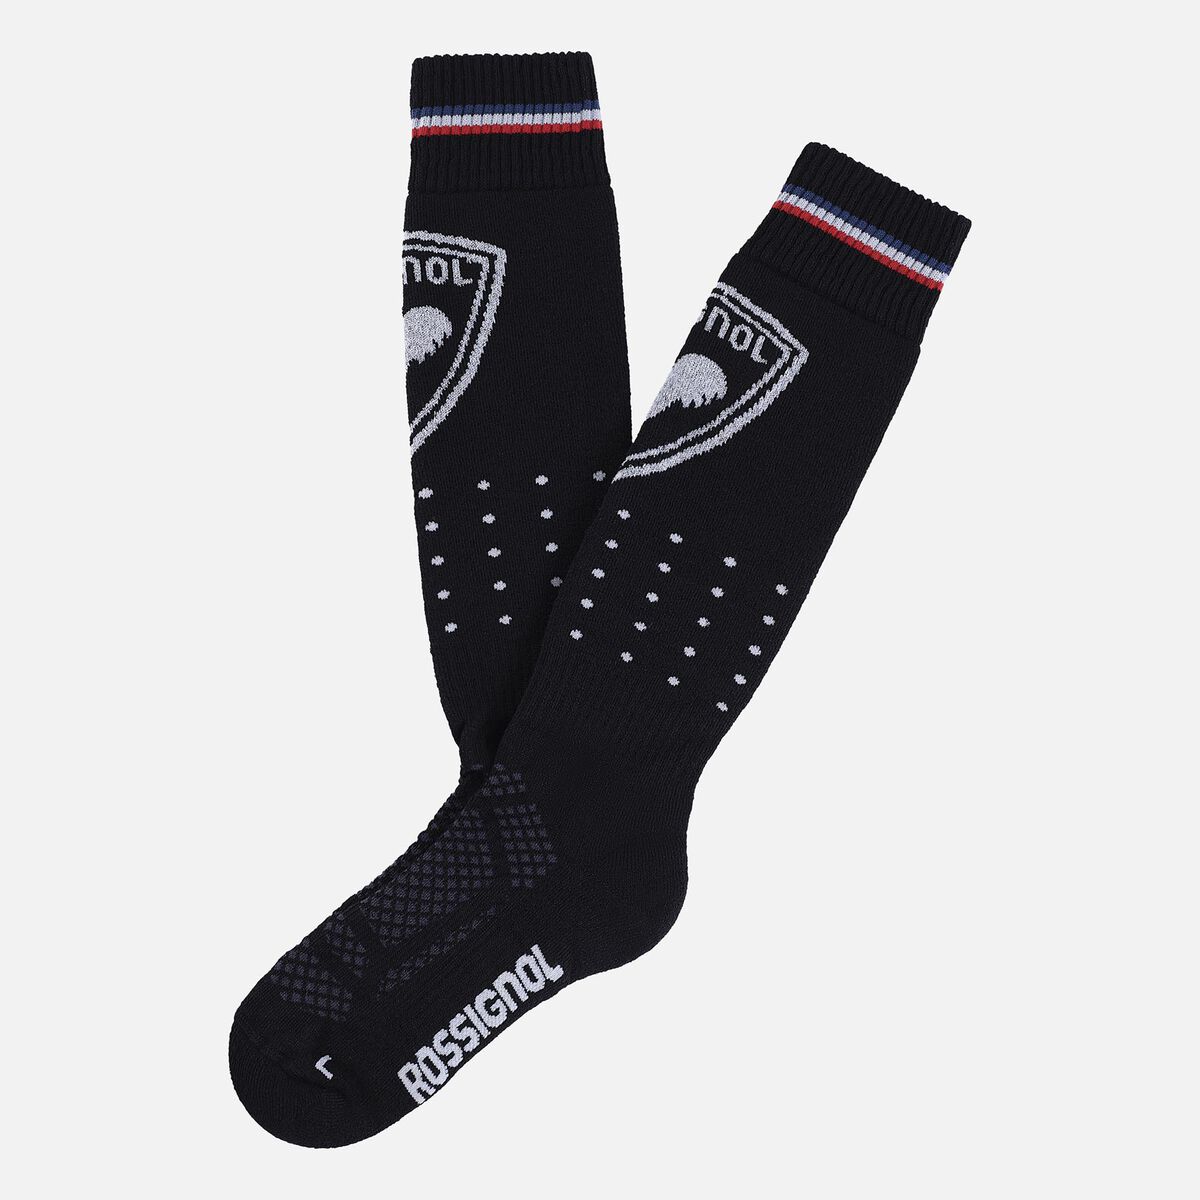 Chaussettes Victory femme